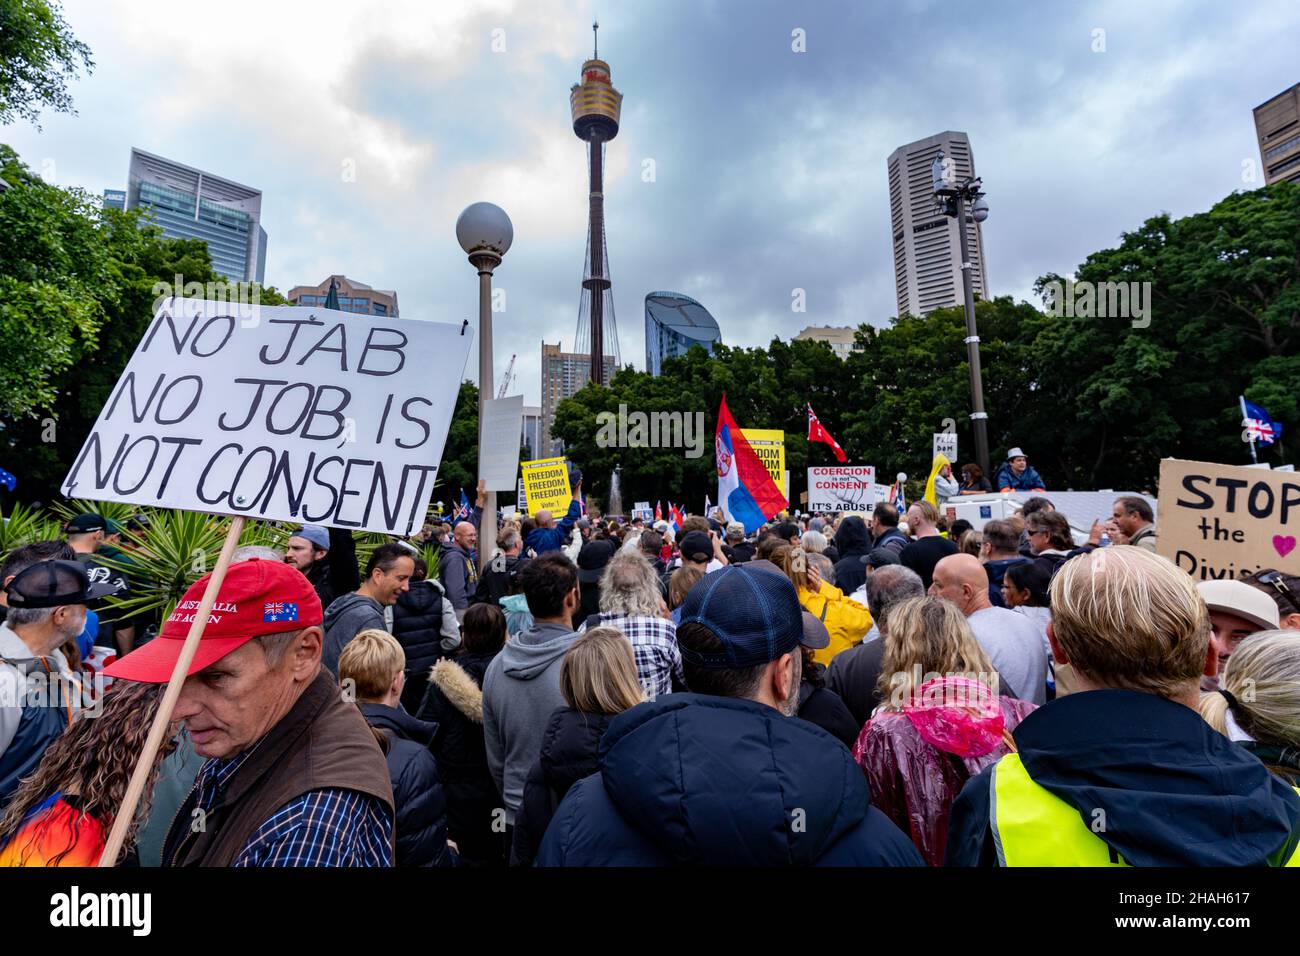 Protest against mandatory covid jabs in Australia. Thousands of people near Sydney Eye Tower on 27 November 2021 protesting government restrictions. Stock Photo